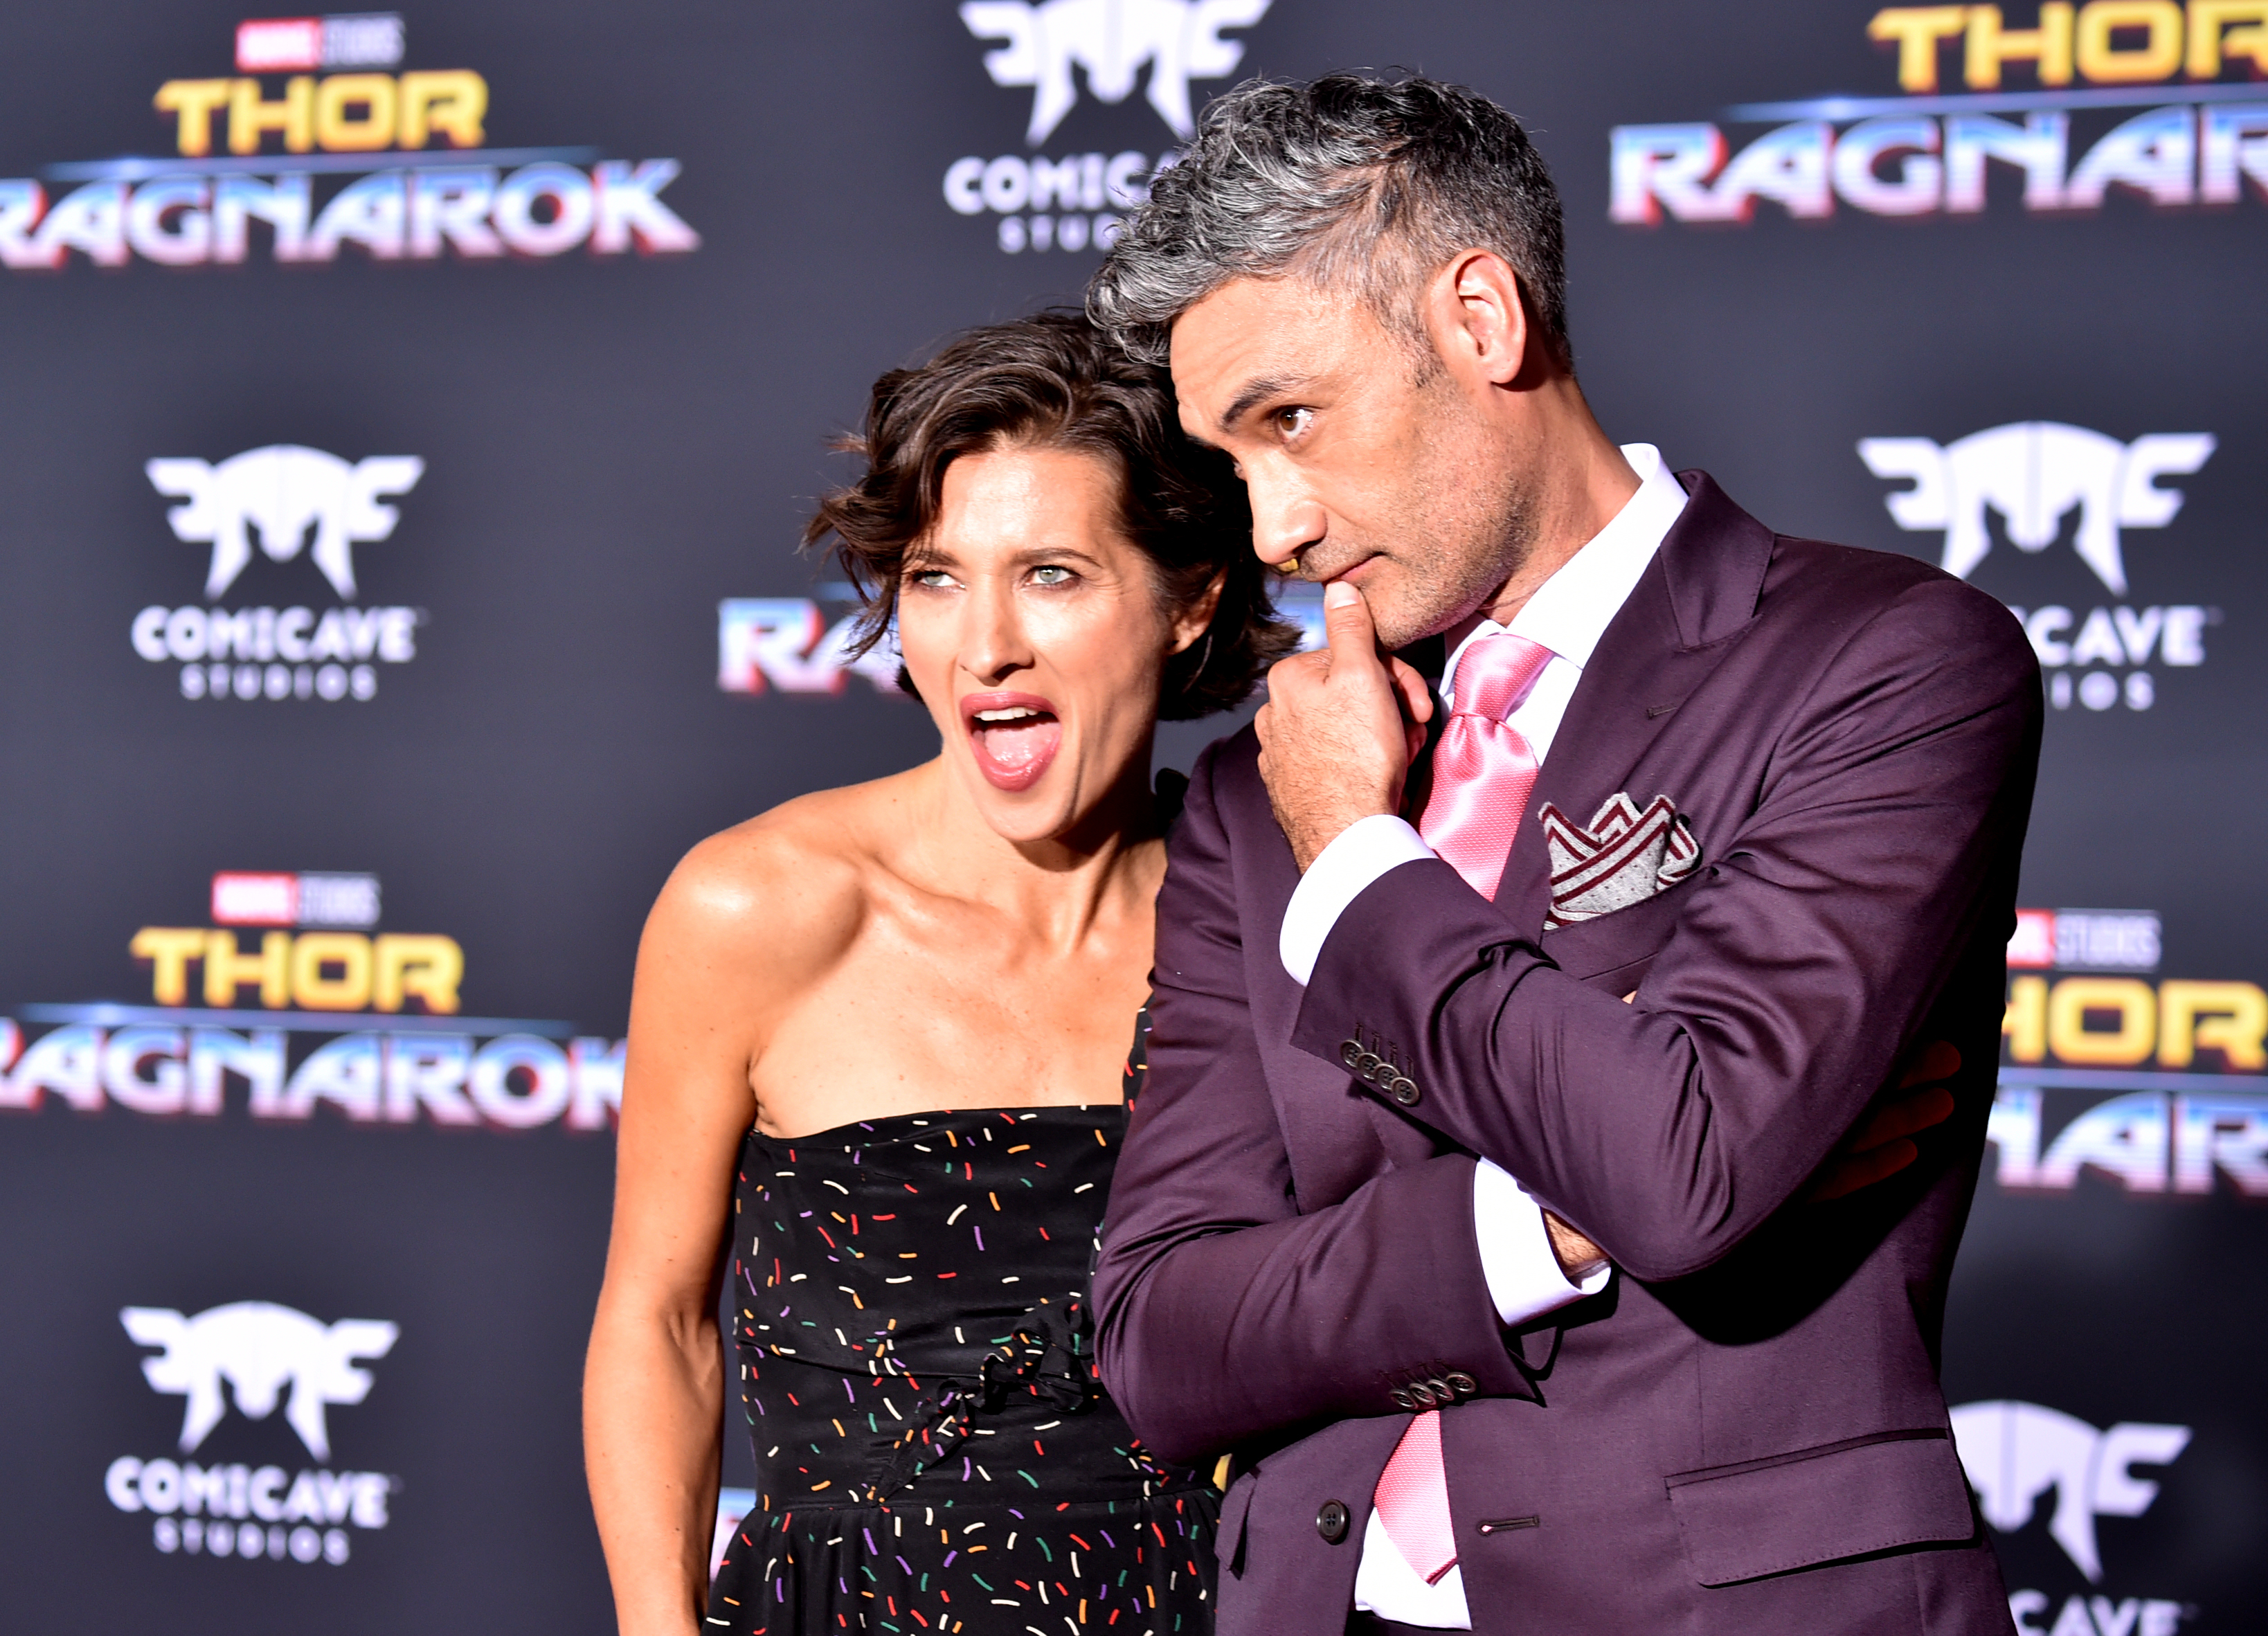 Chelsea, in a strapless outfit, and Taika, in a suit and tie, at a Thor: Ragnarok event